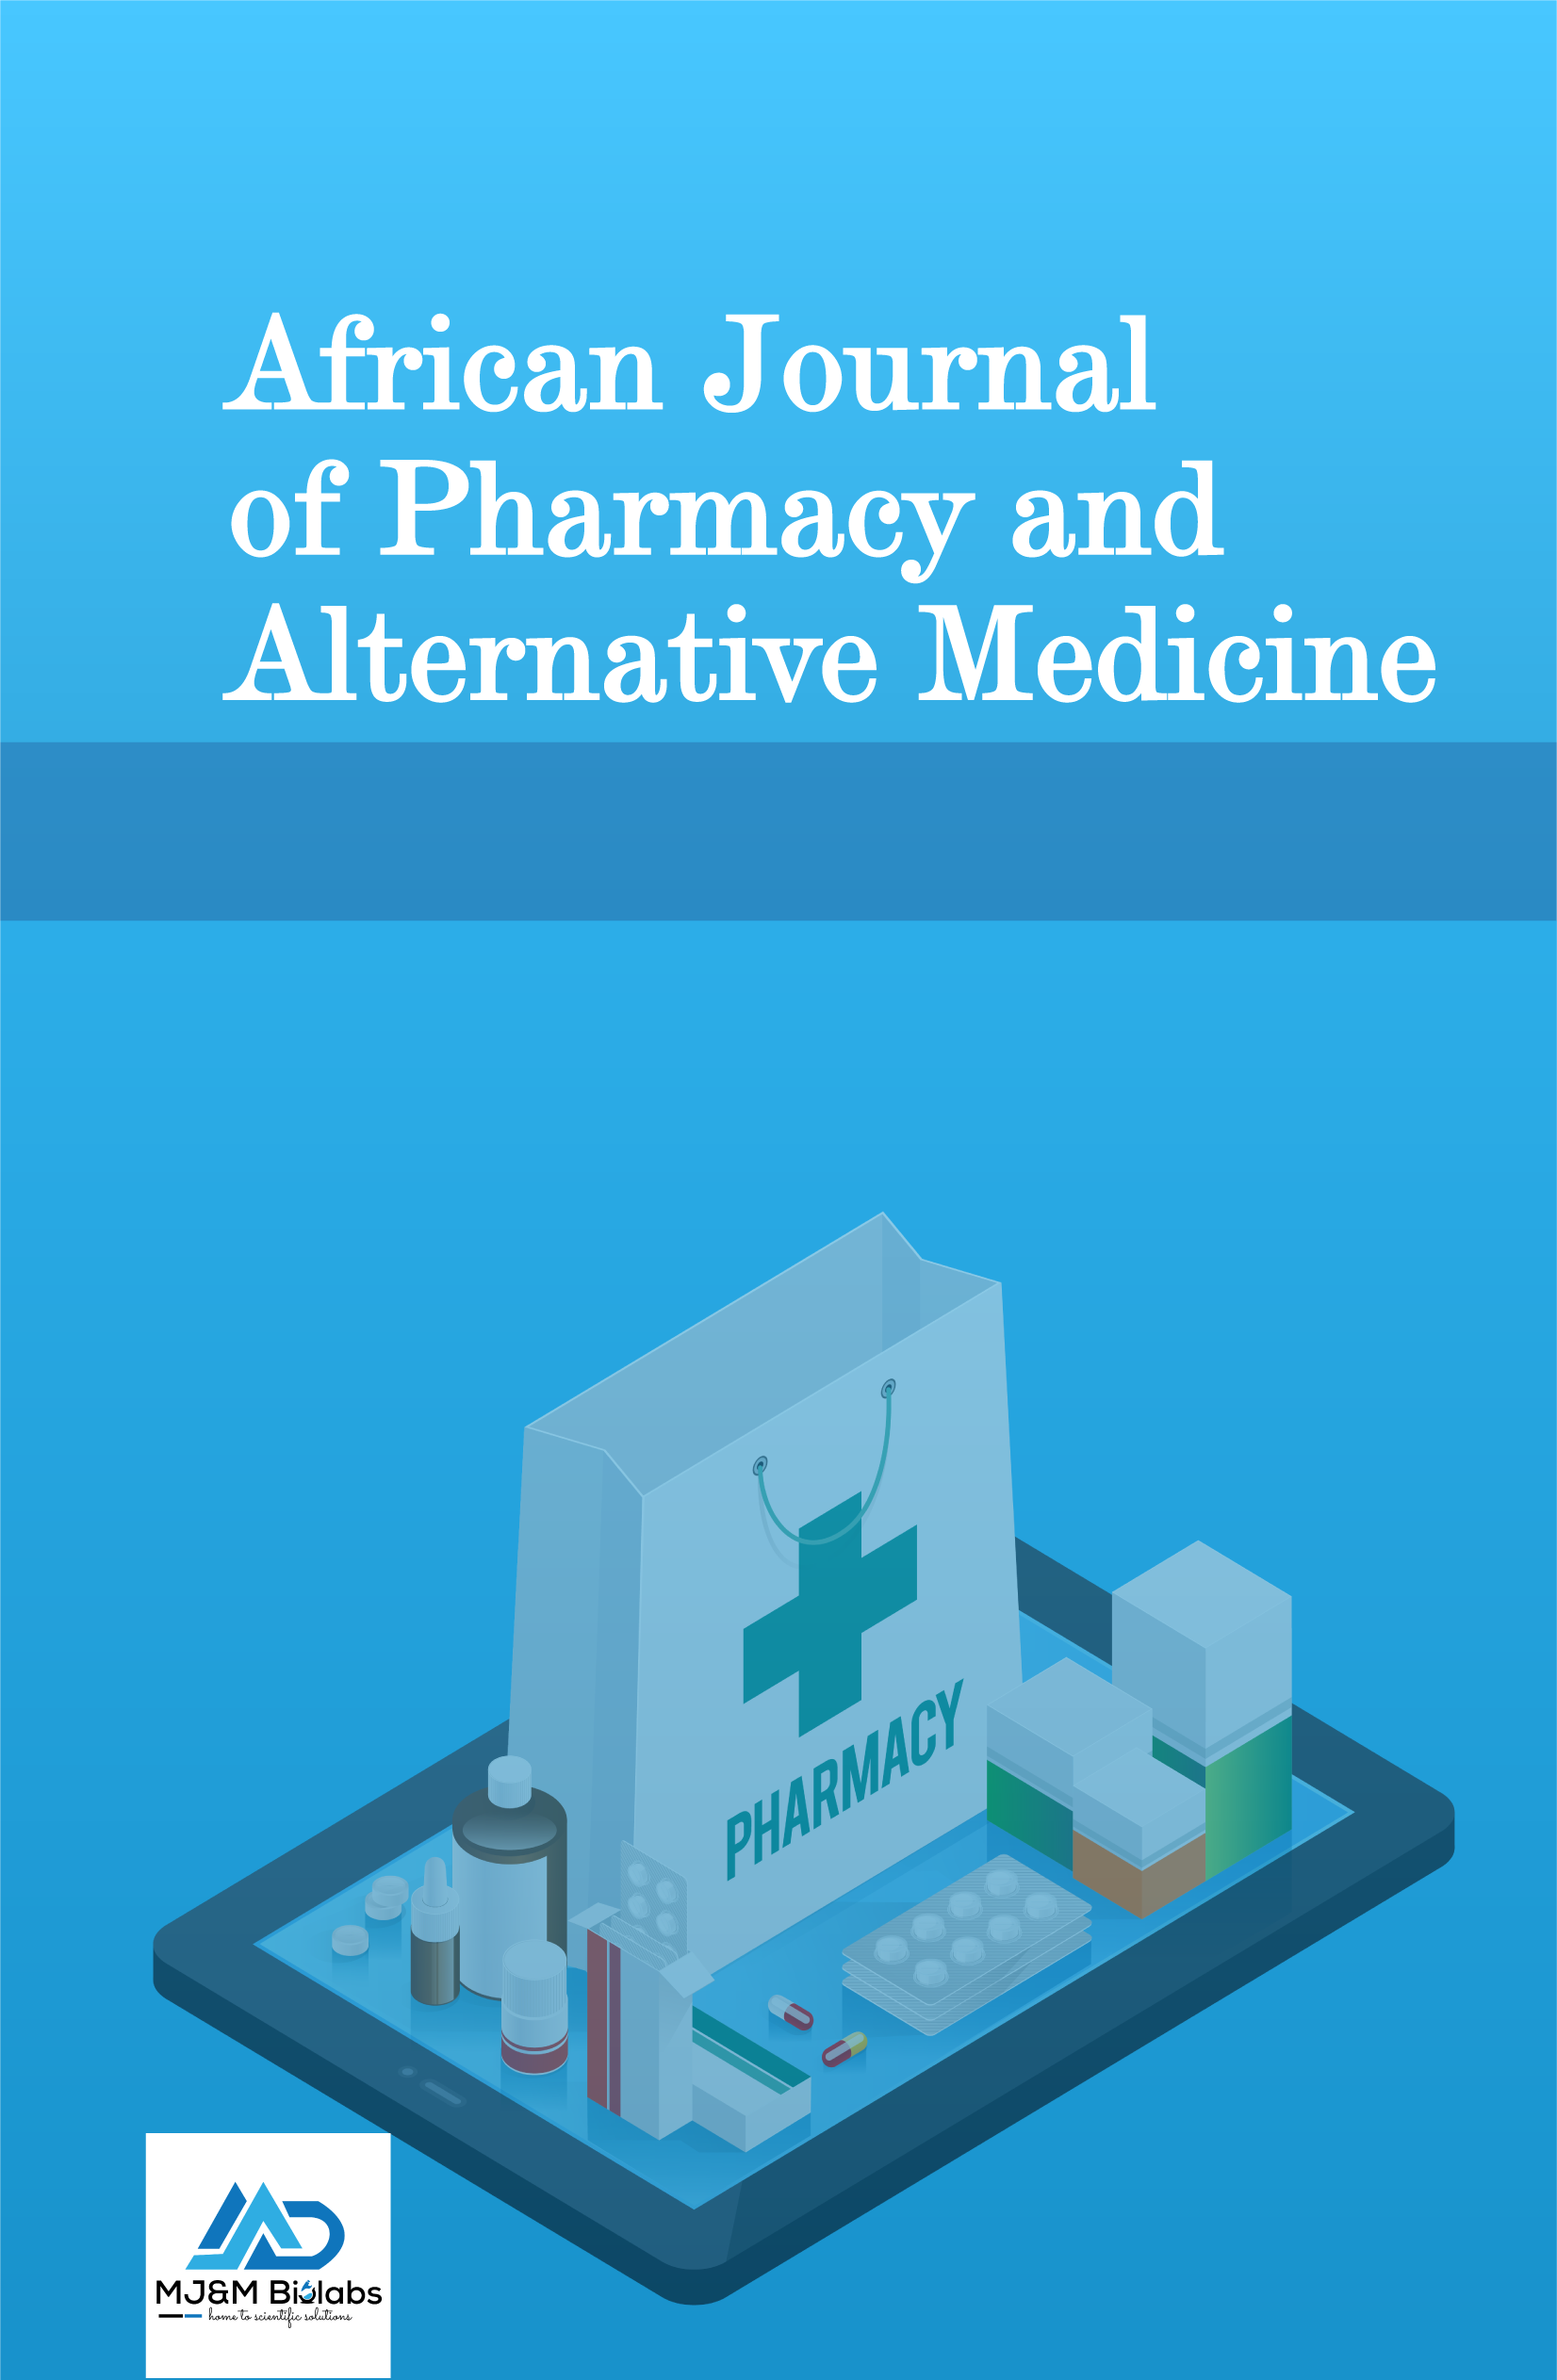 African Journal of Pharmacy and Alternative Medicine